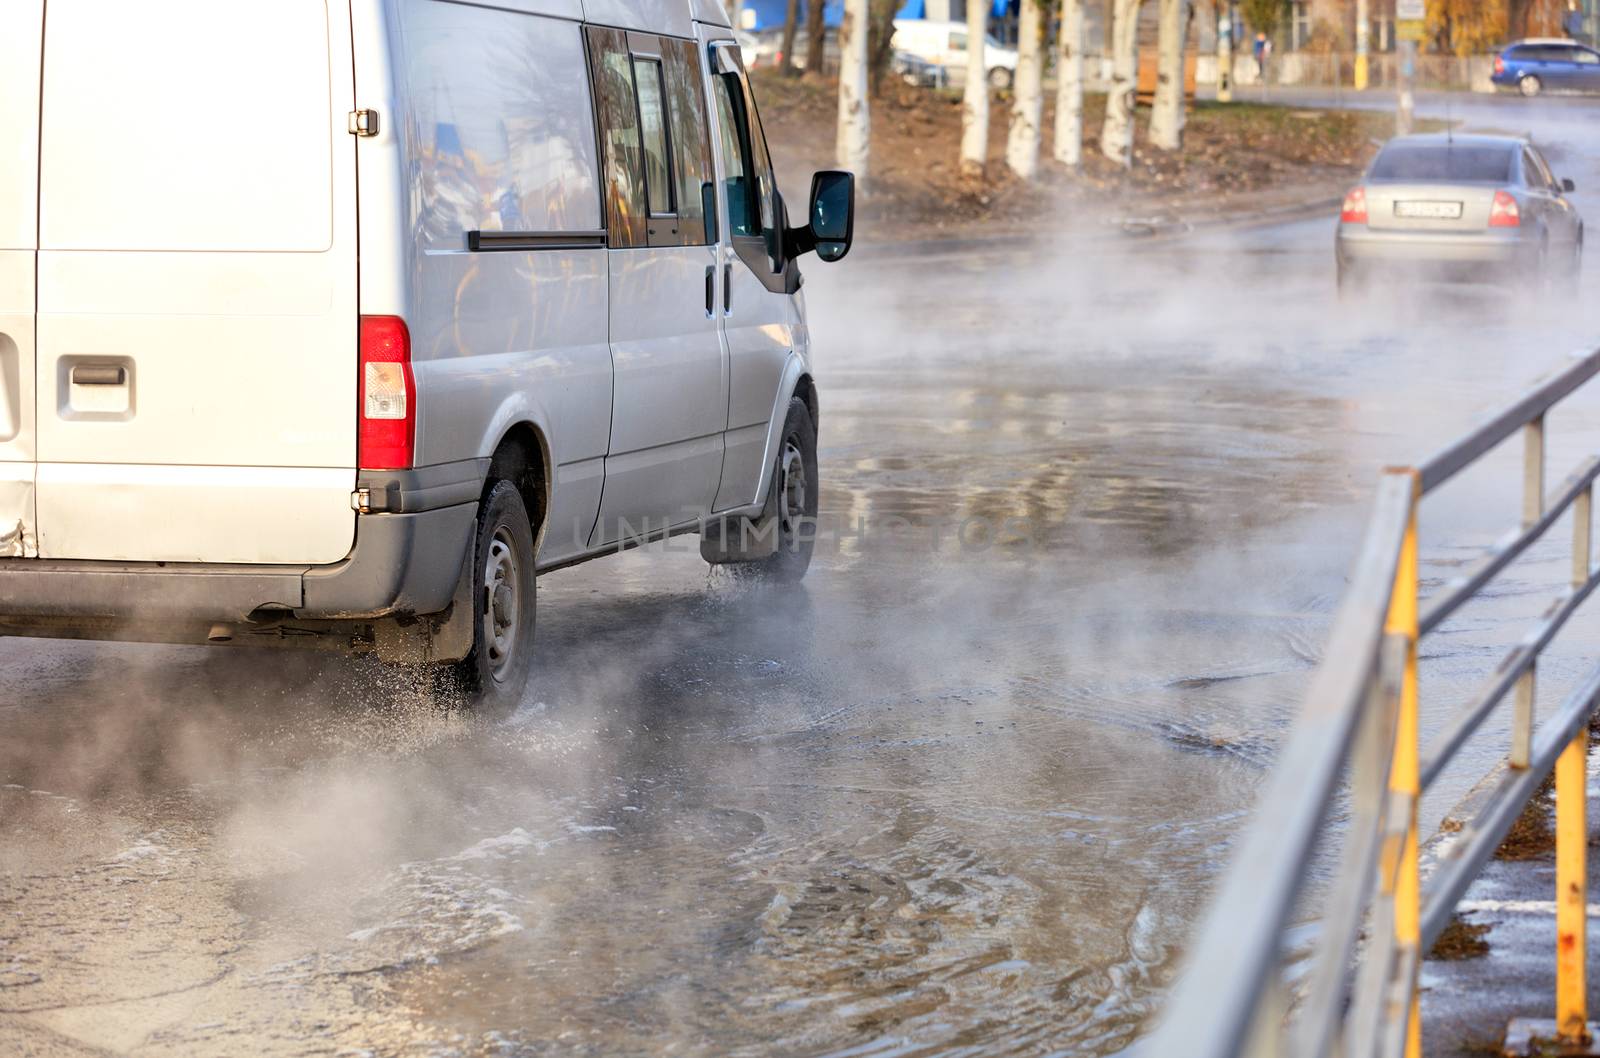 An accident on a heating main, a breakthrough in a pipe with hot water, cars drive along a flooded road, water vapor forms a smokescreen over the asphalt, image with copy space.